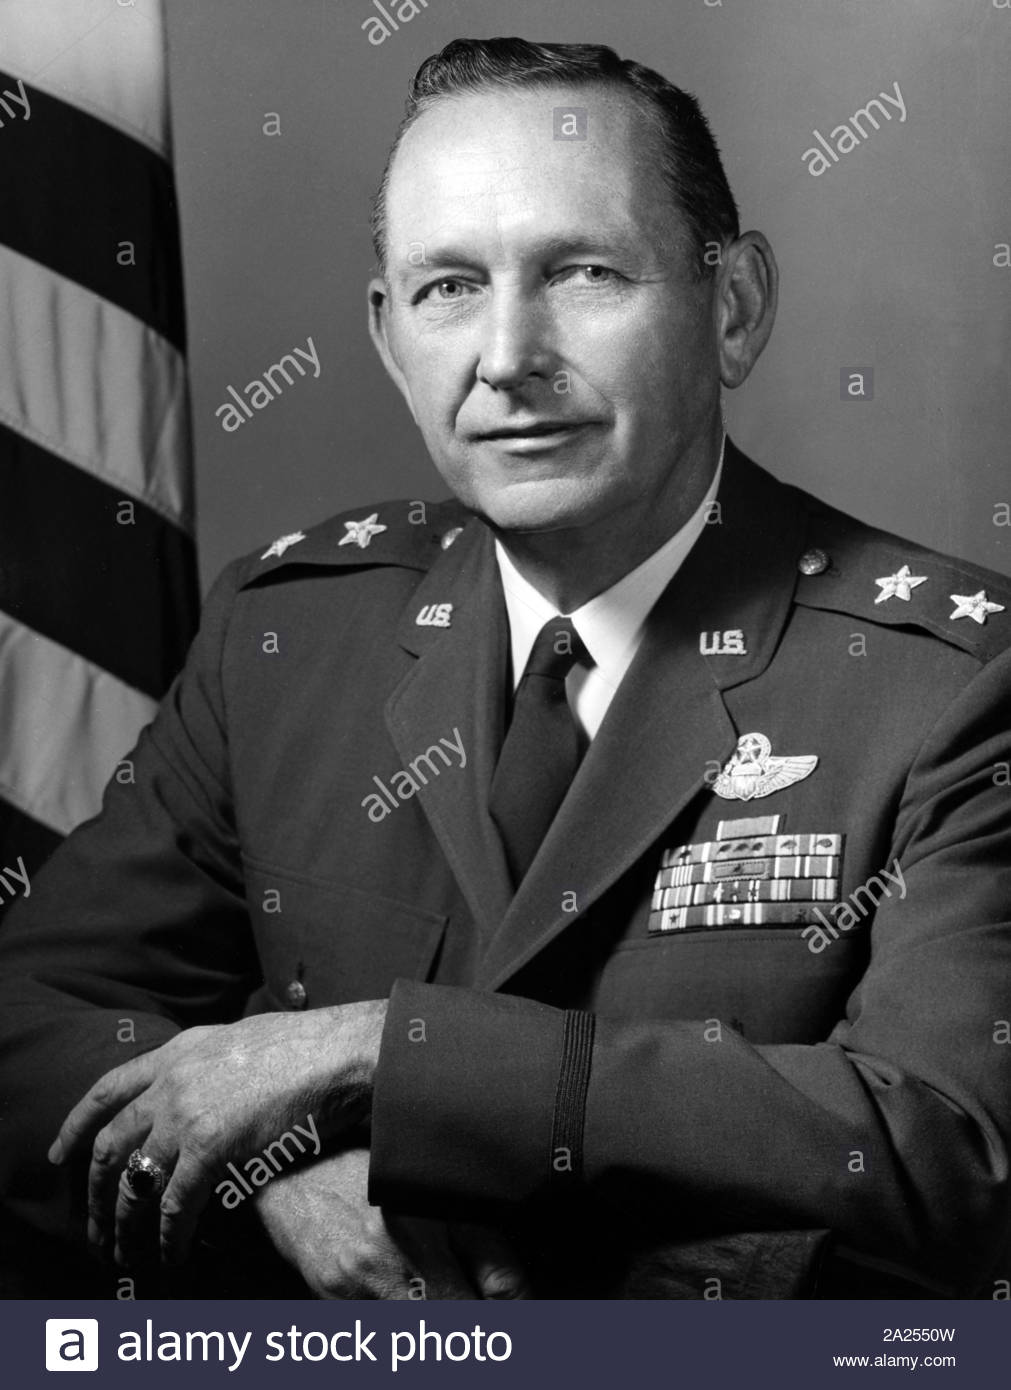 Major General William C. Garland US Air Force Officer. born in 1916. During World War II, General Garland served with the 401st Bombardment Group stationed in England and flew 32 combat missions in B-17 bomber aircraft. He became commander of the 1st Strategic Aerospace Division, Vandenberg Air Force Base, Calif., in August 1969. Stock Photo